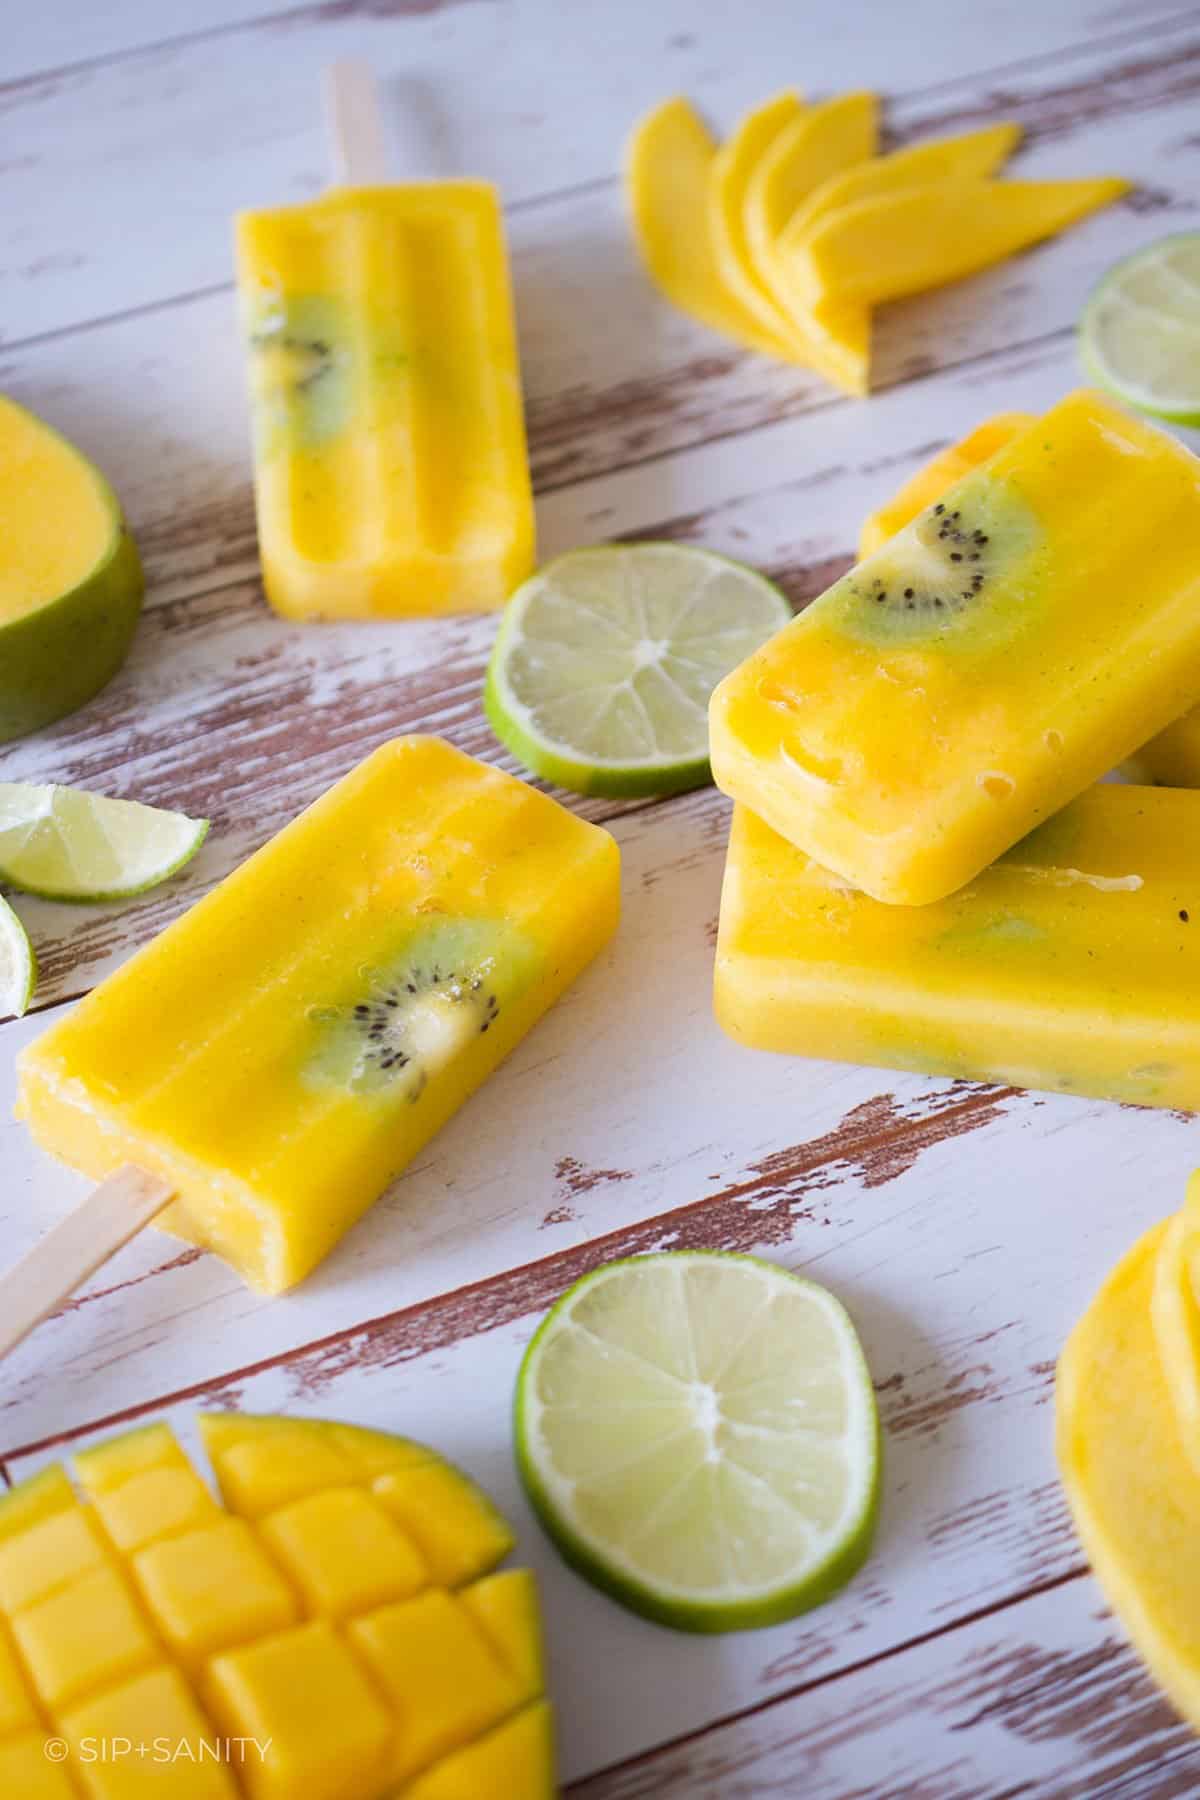 Mango lime popsicles, lime and mango slices on a wooden table.